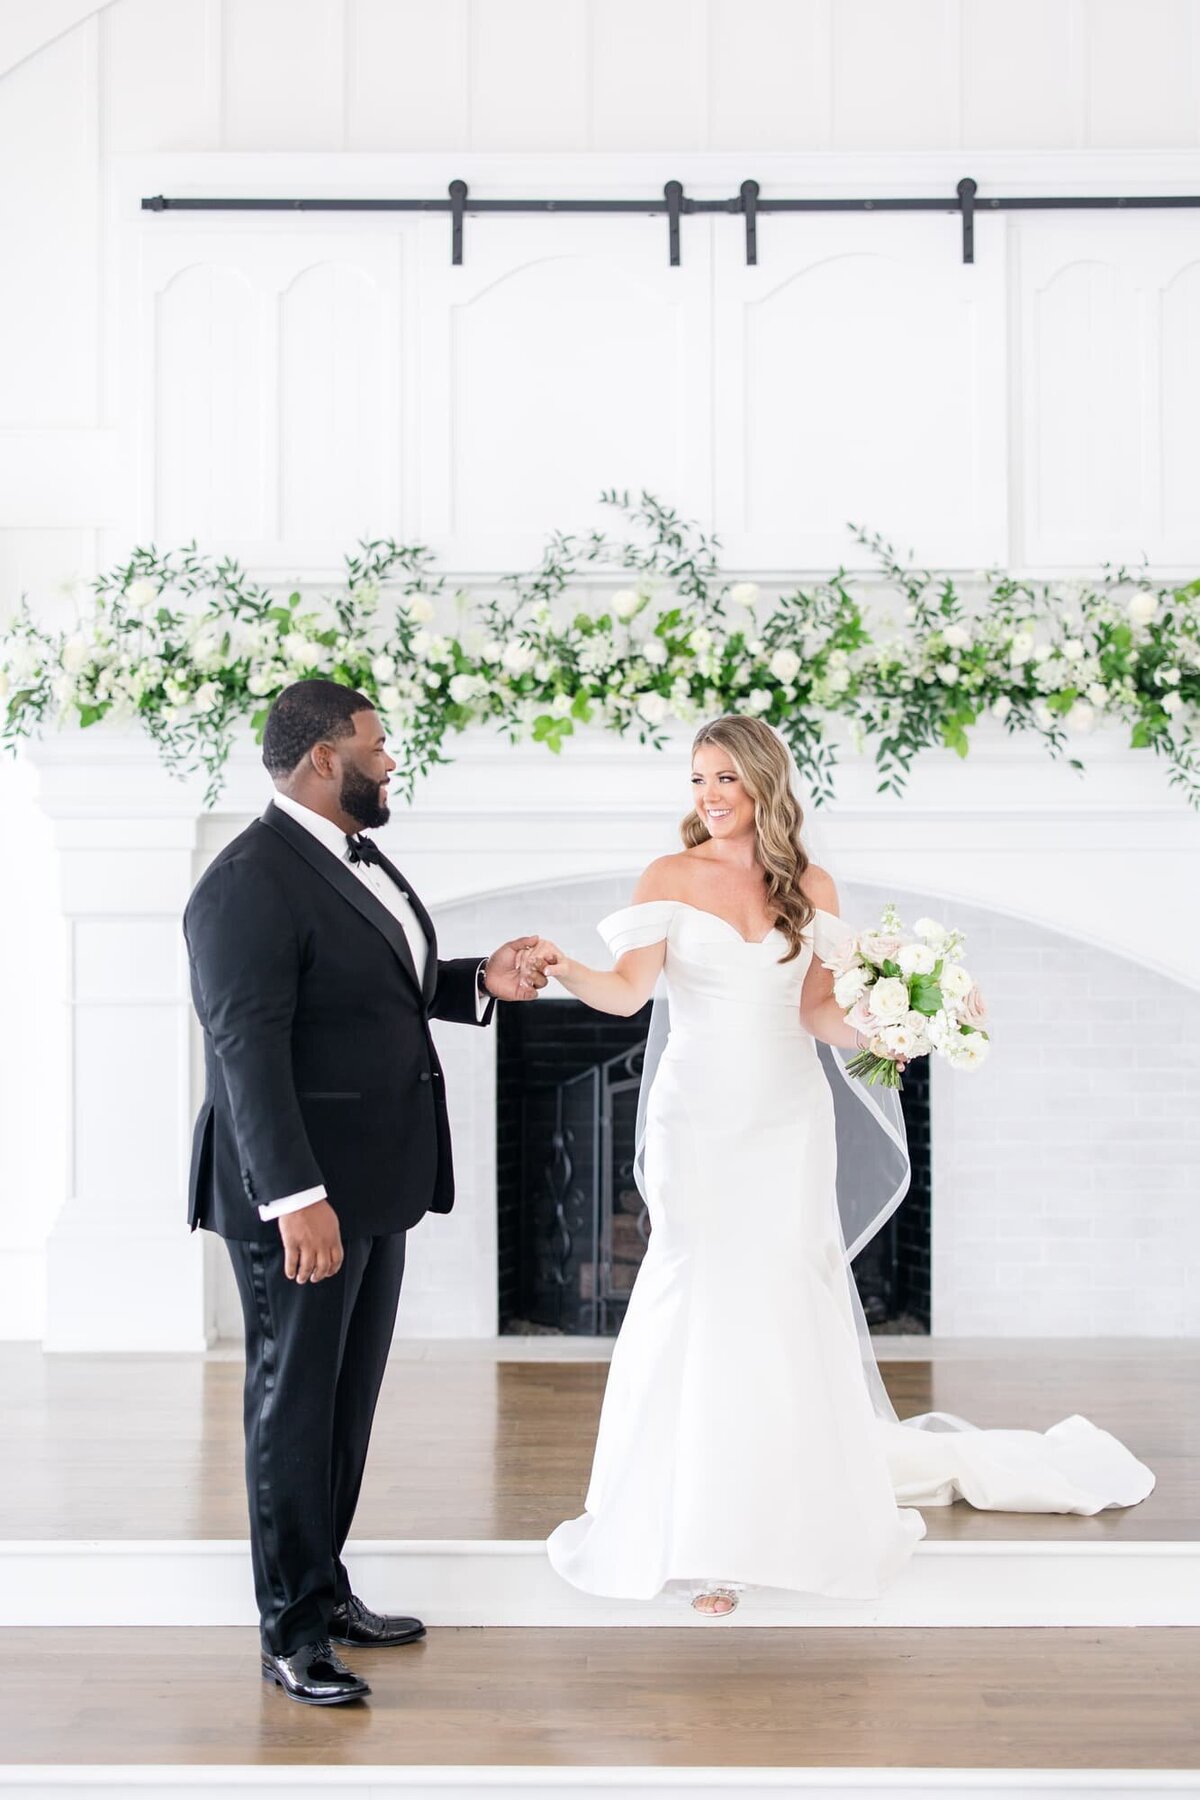 Katie and Alec Wedding Photography Wedding Videography Birmingham, Alabama Husband and Wife Team Photo Video Weddings Engagement Engagements Light Airy Focused on Marriage  Rachel + Eric's Oak Meado_mnb2